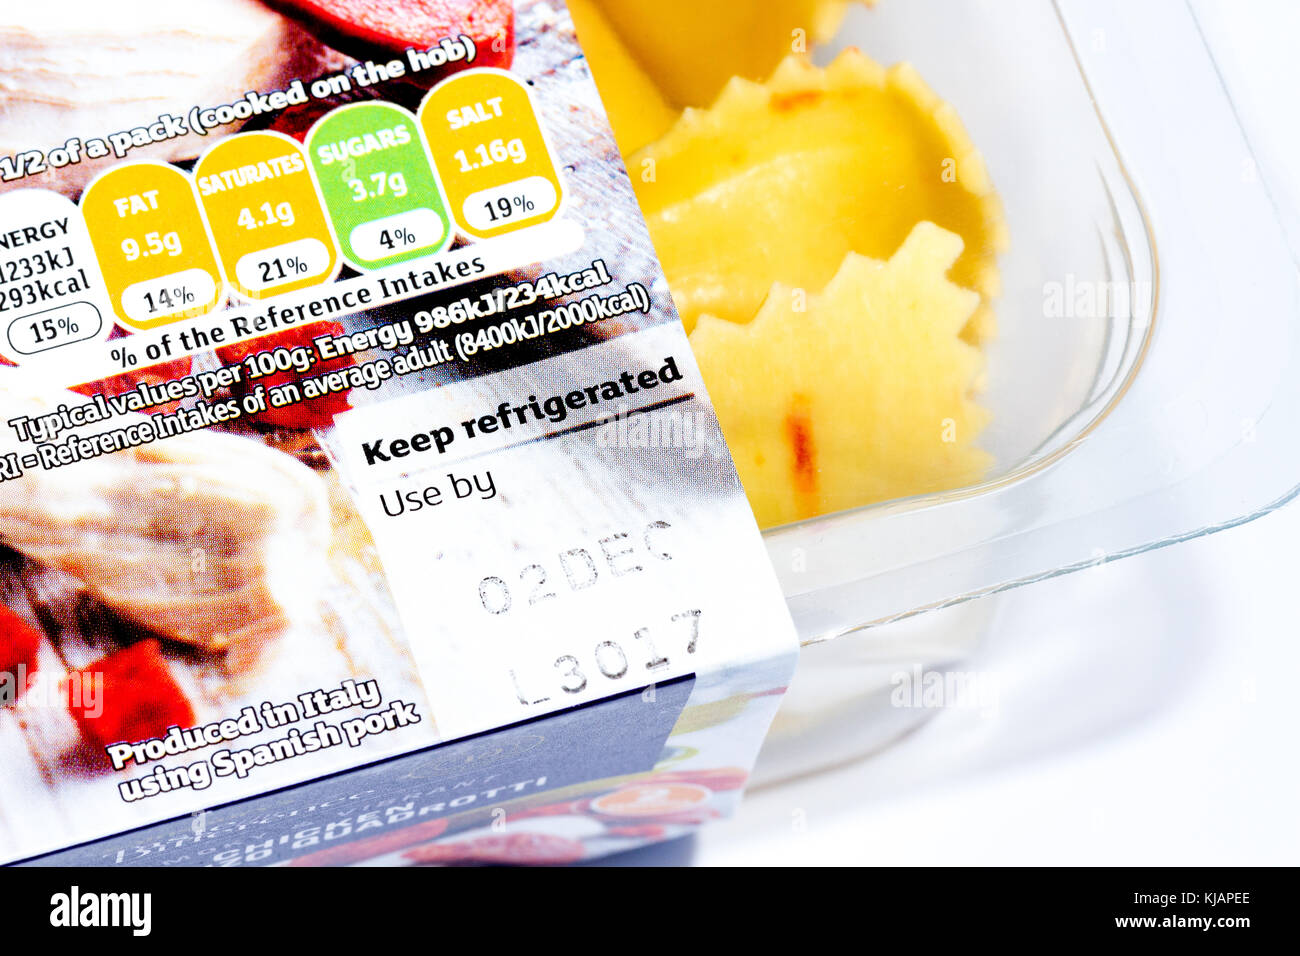 Use by date & nutritional information traffic light rating system on a pack of Sainsburys's Taste The Difference chicken & chorizo quadrotti pasta Stock Photo